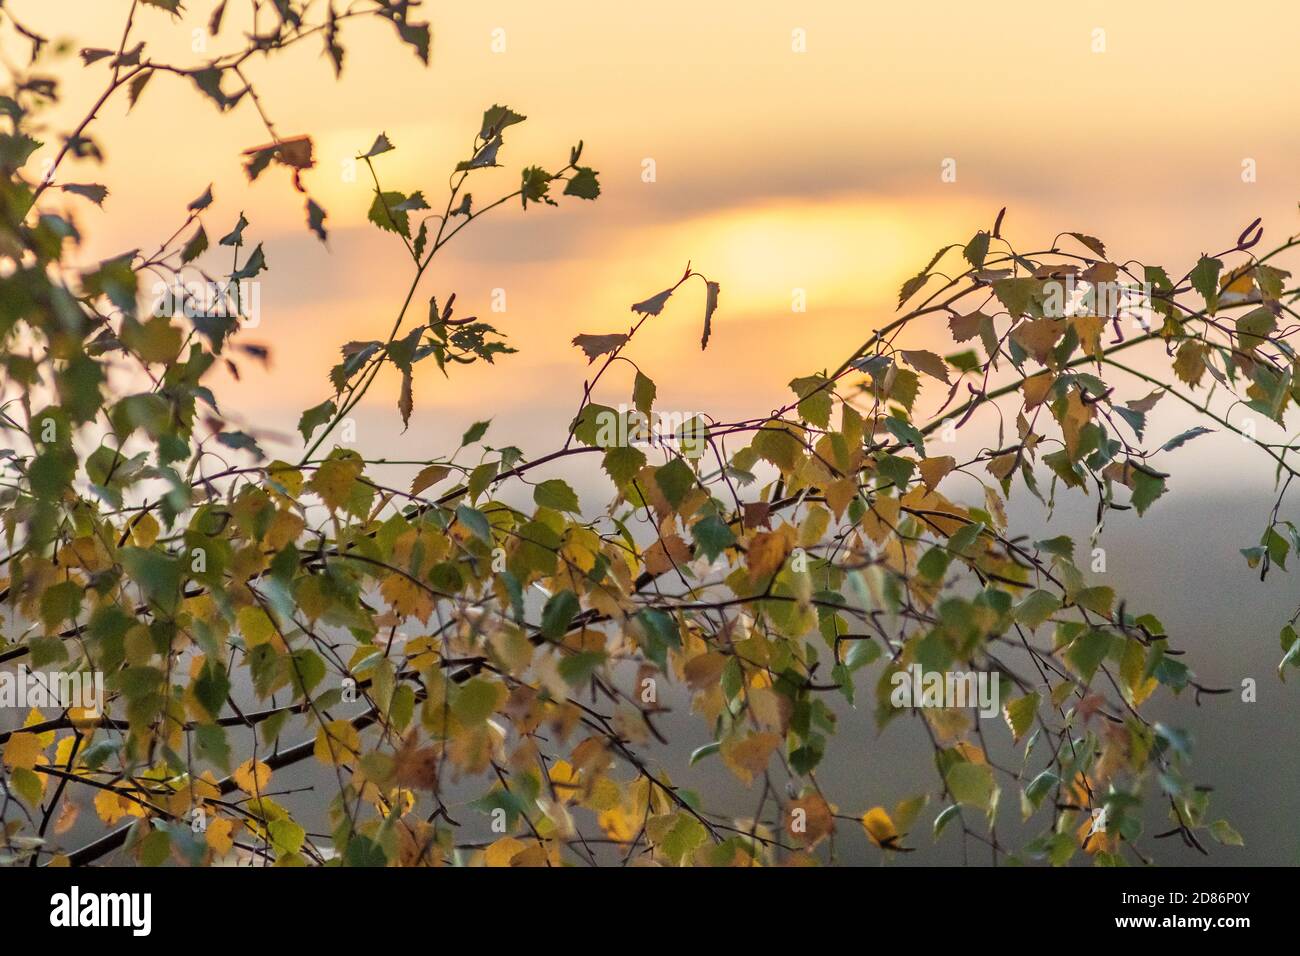 Silver Birch tree leaves fluttering in front of a warm orange autumn sunset Stock Photo